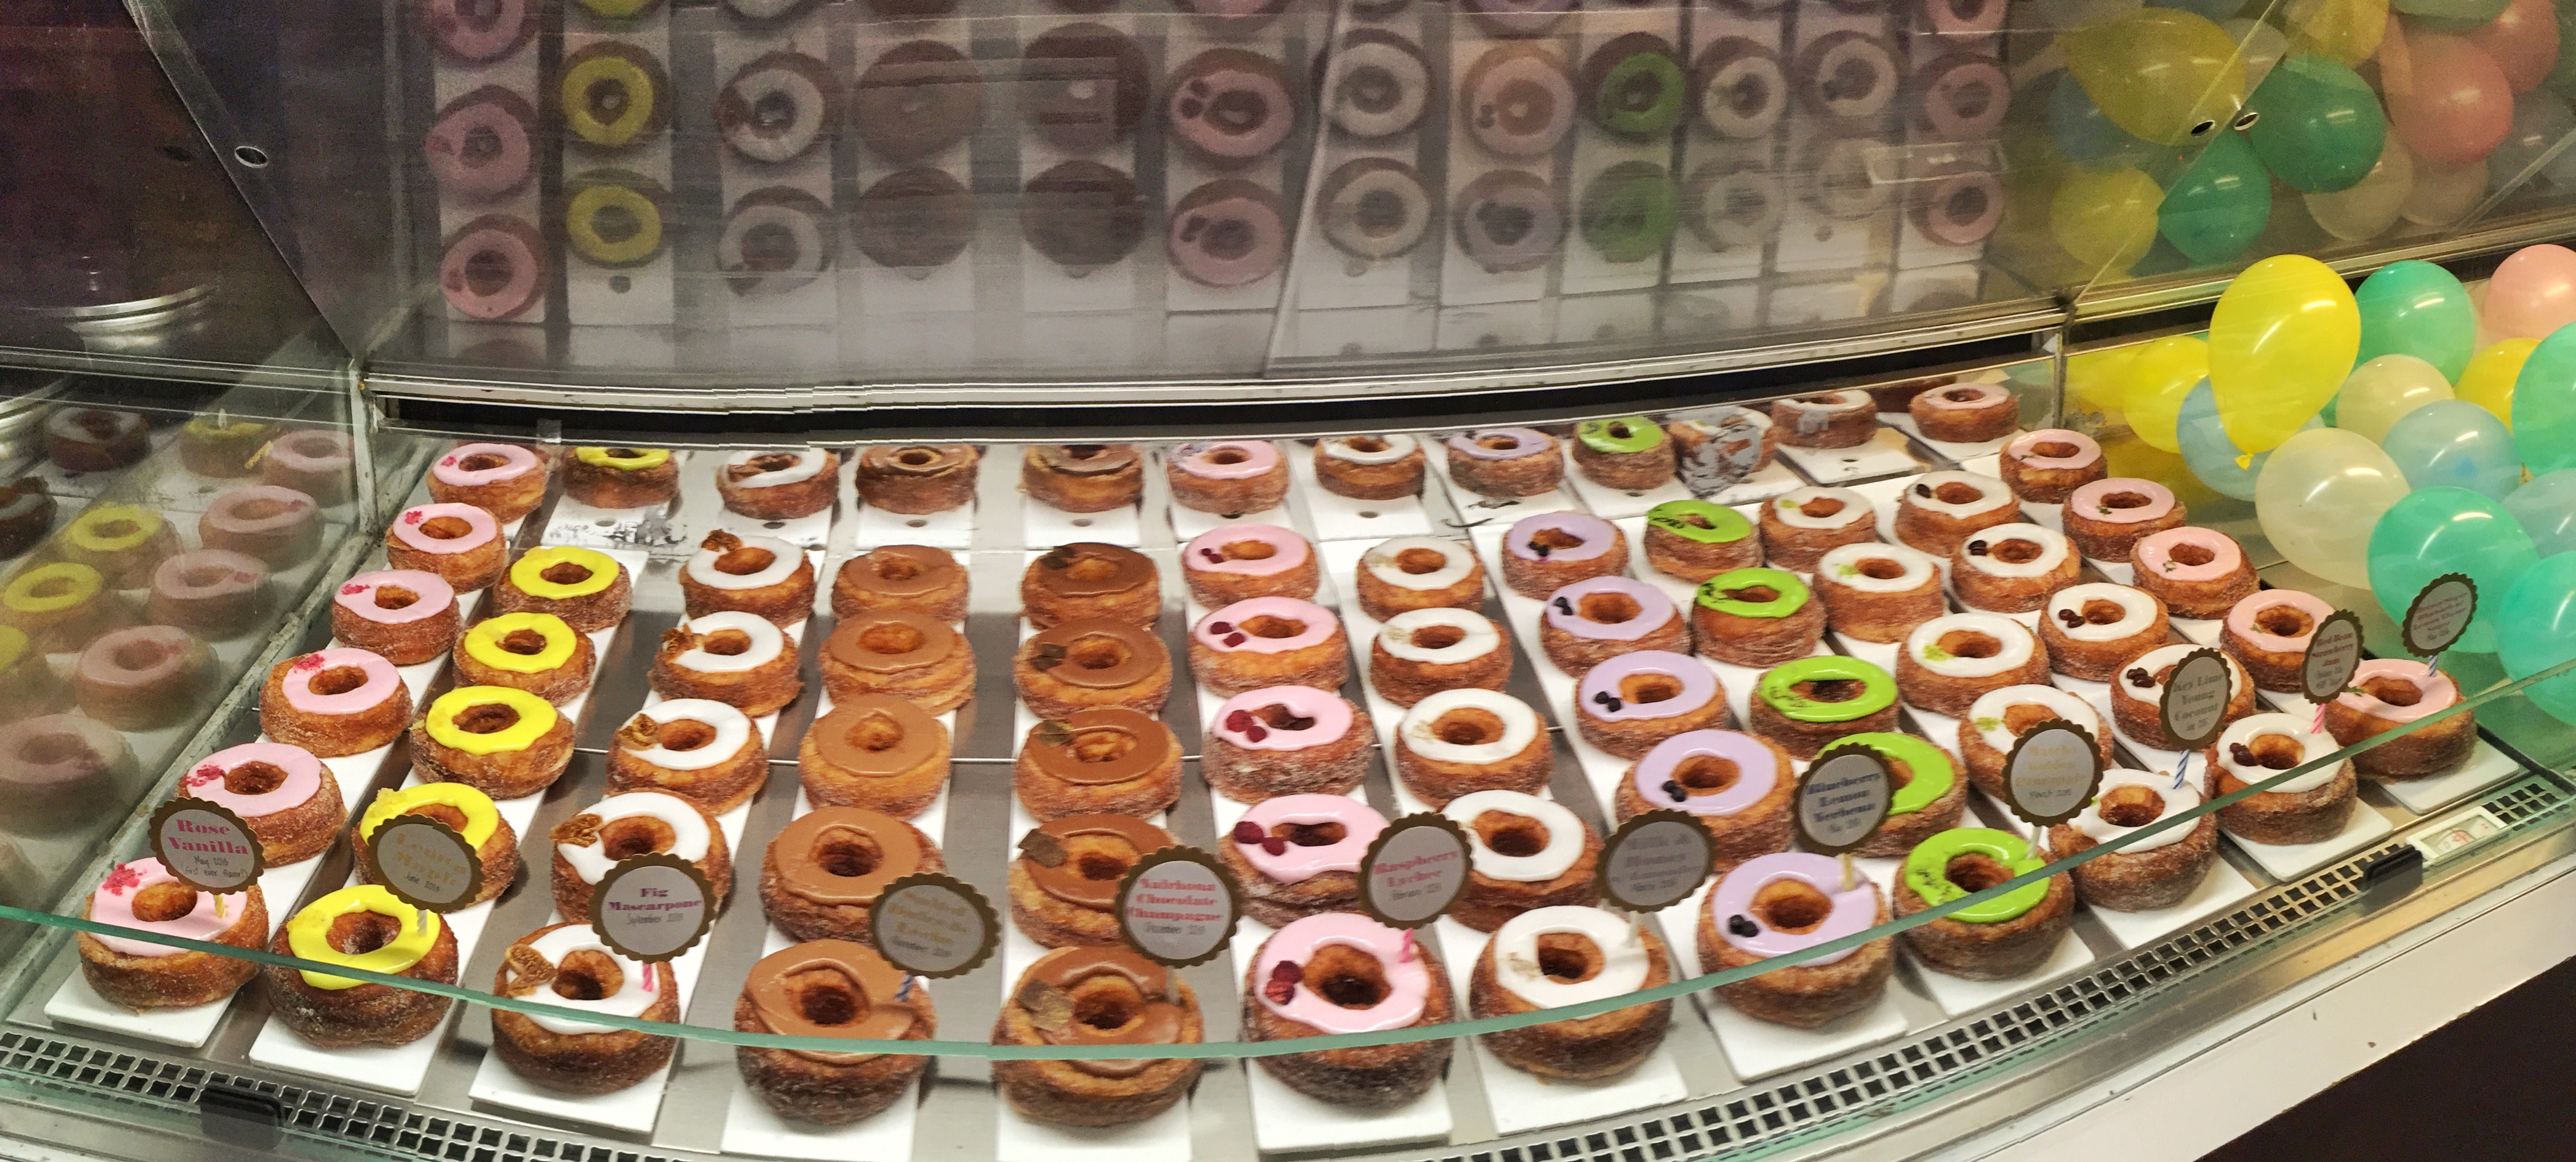 Case of Cronuts